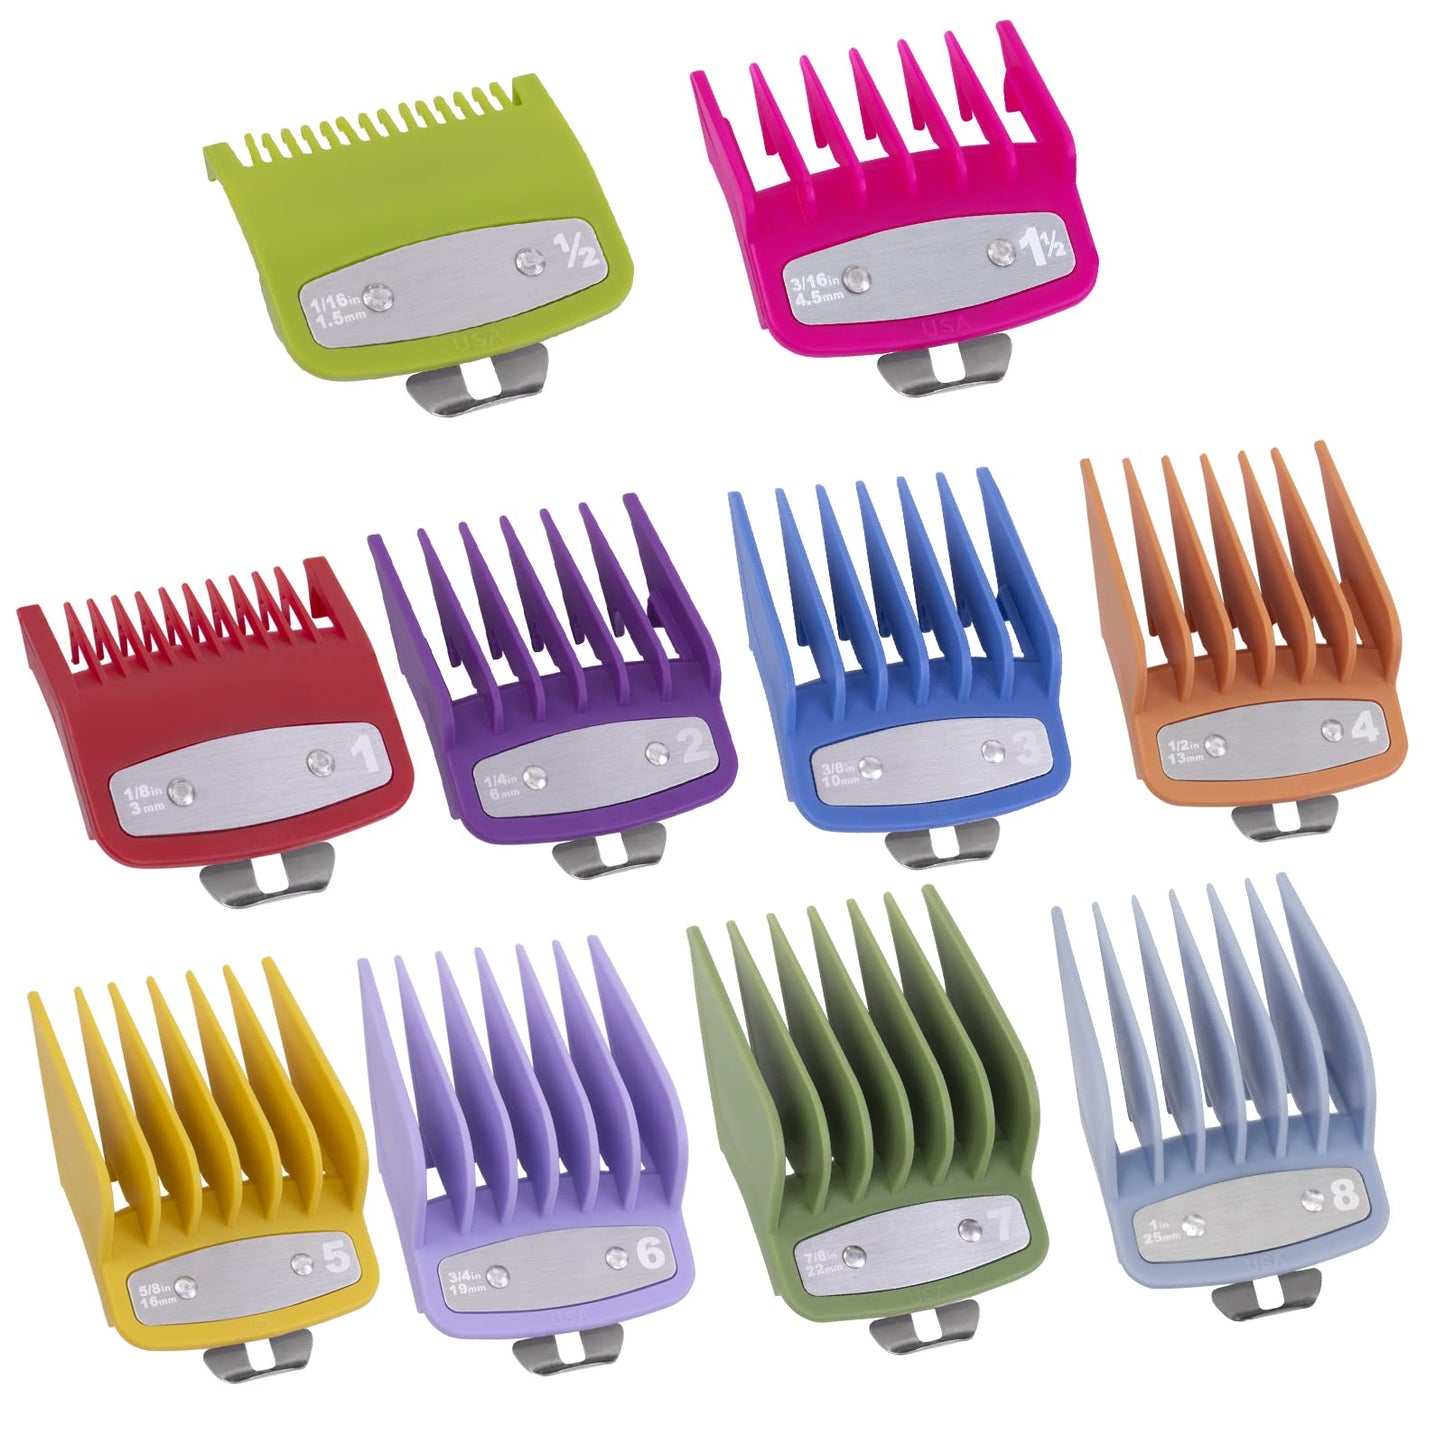 Clipper Guards Cutting Guides with Metal Clip Compatible with Wahl Hair Clippers -Attachment #3171-500 1/8” to 1inch